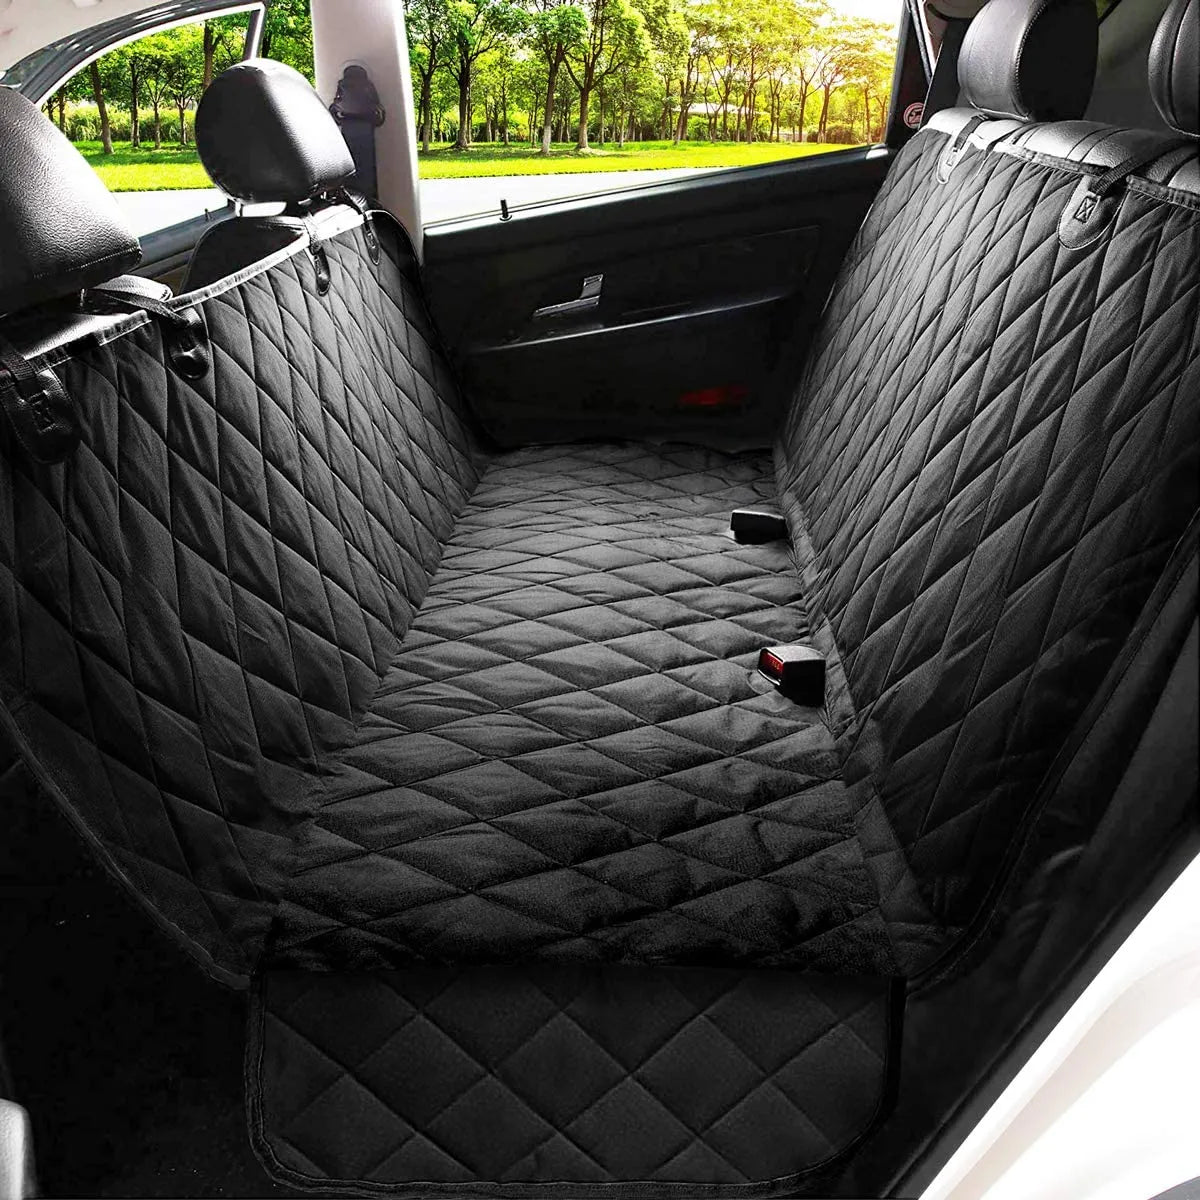 Dog Car Seat Cover For Car Rear Back